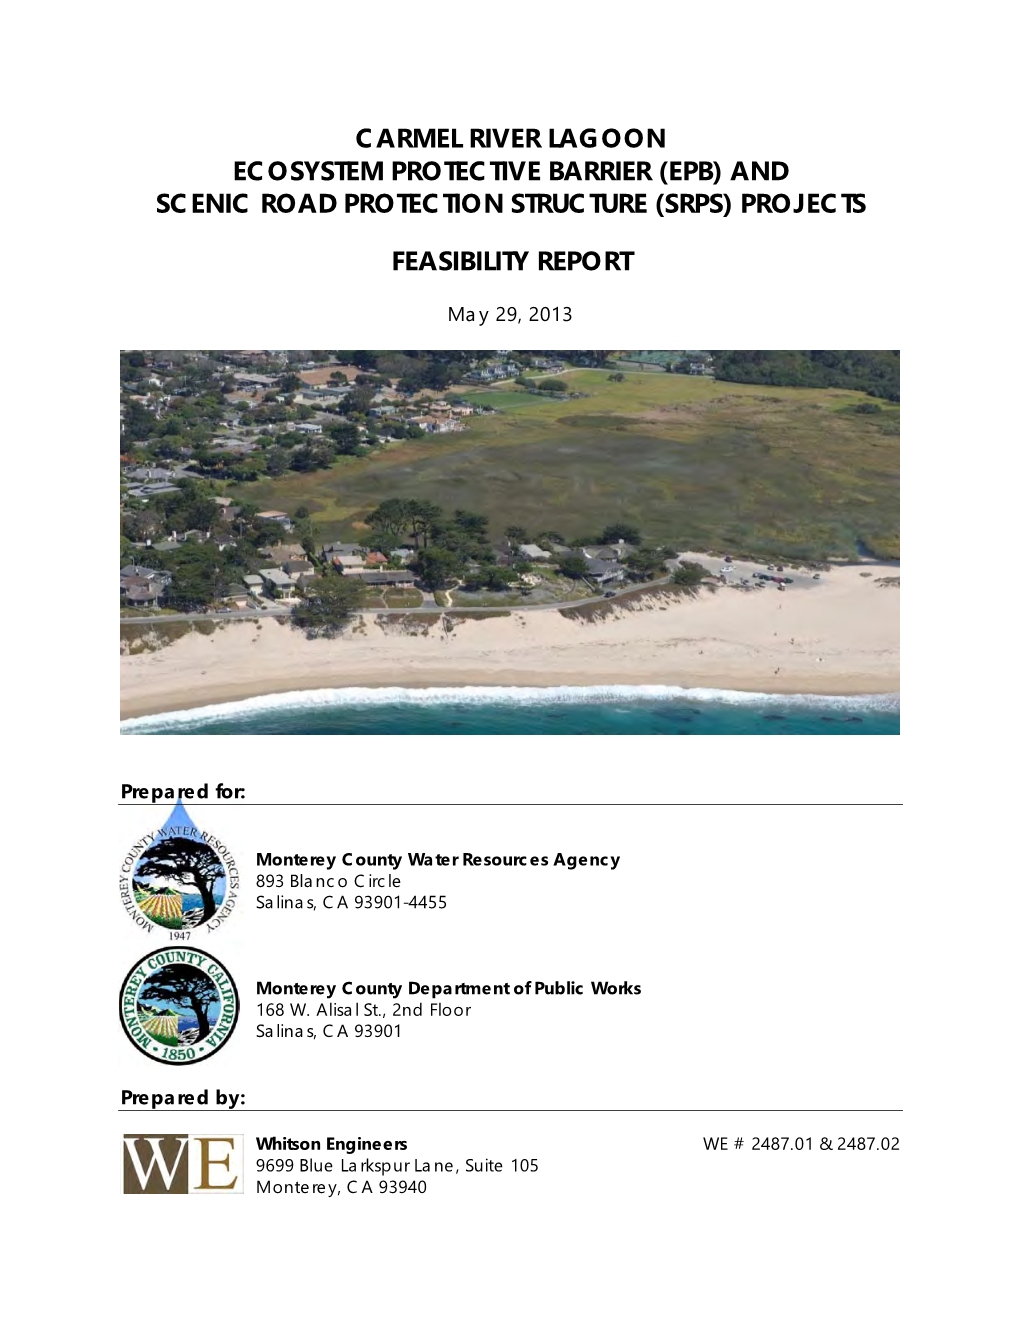 Epb) and Scenic Road Protection Structure (Srps) Projects